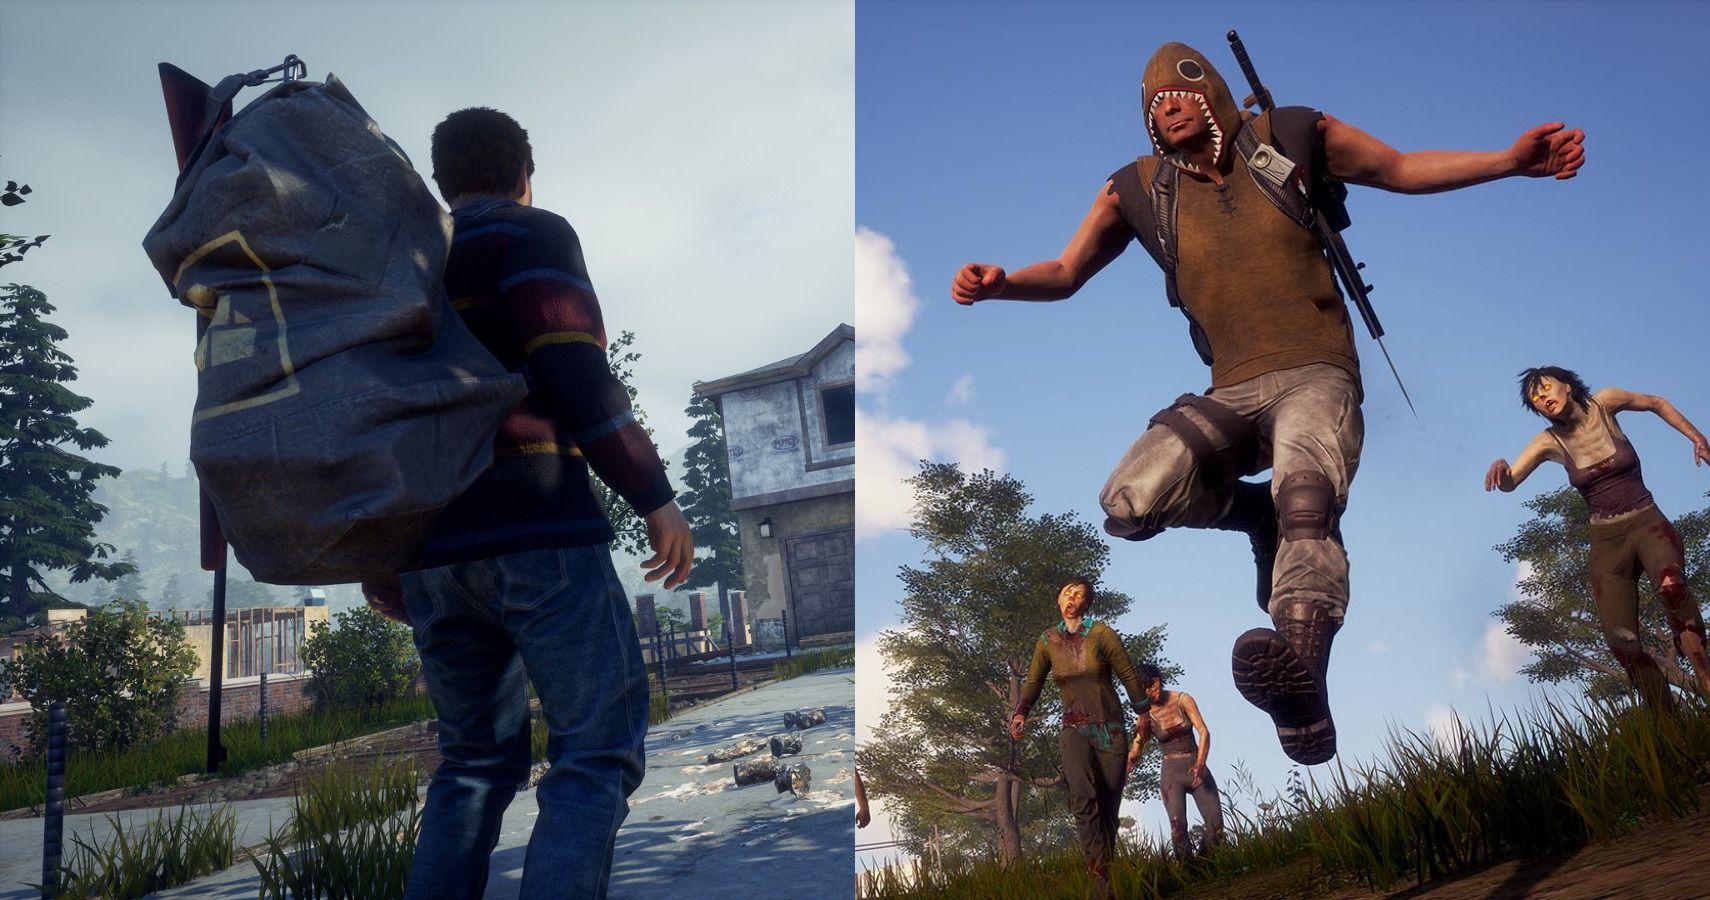 State Of Decay 2 Survivor With Backpack And Survivor Jumping